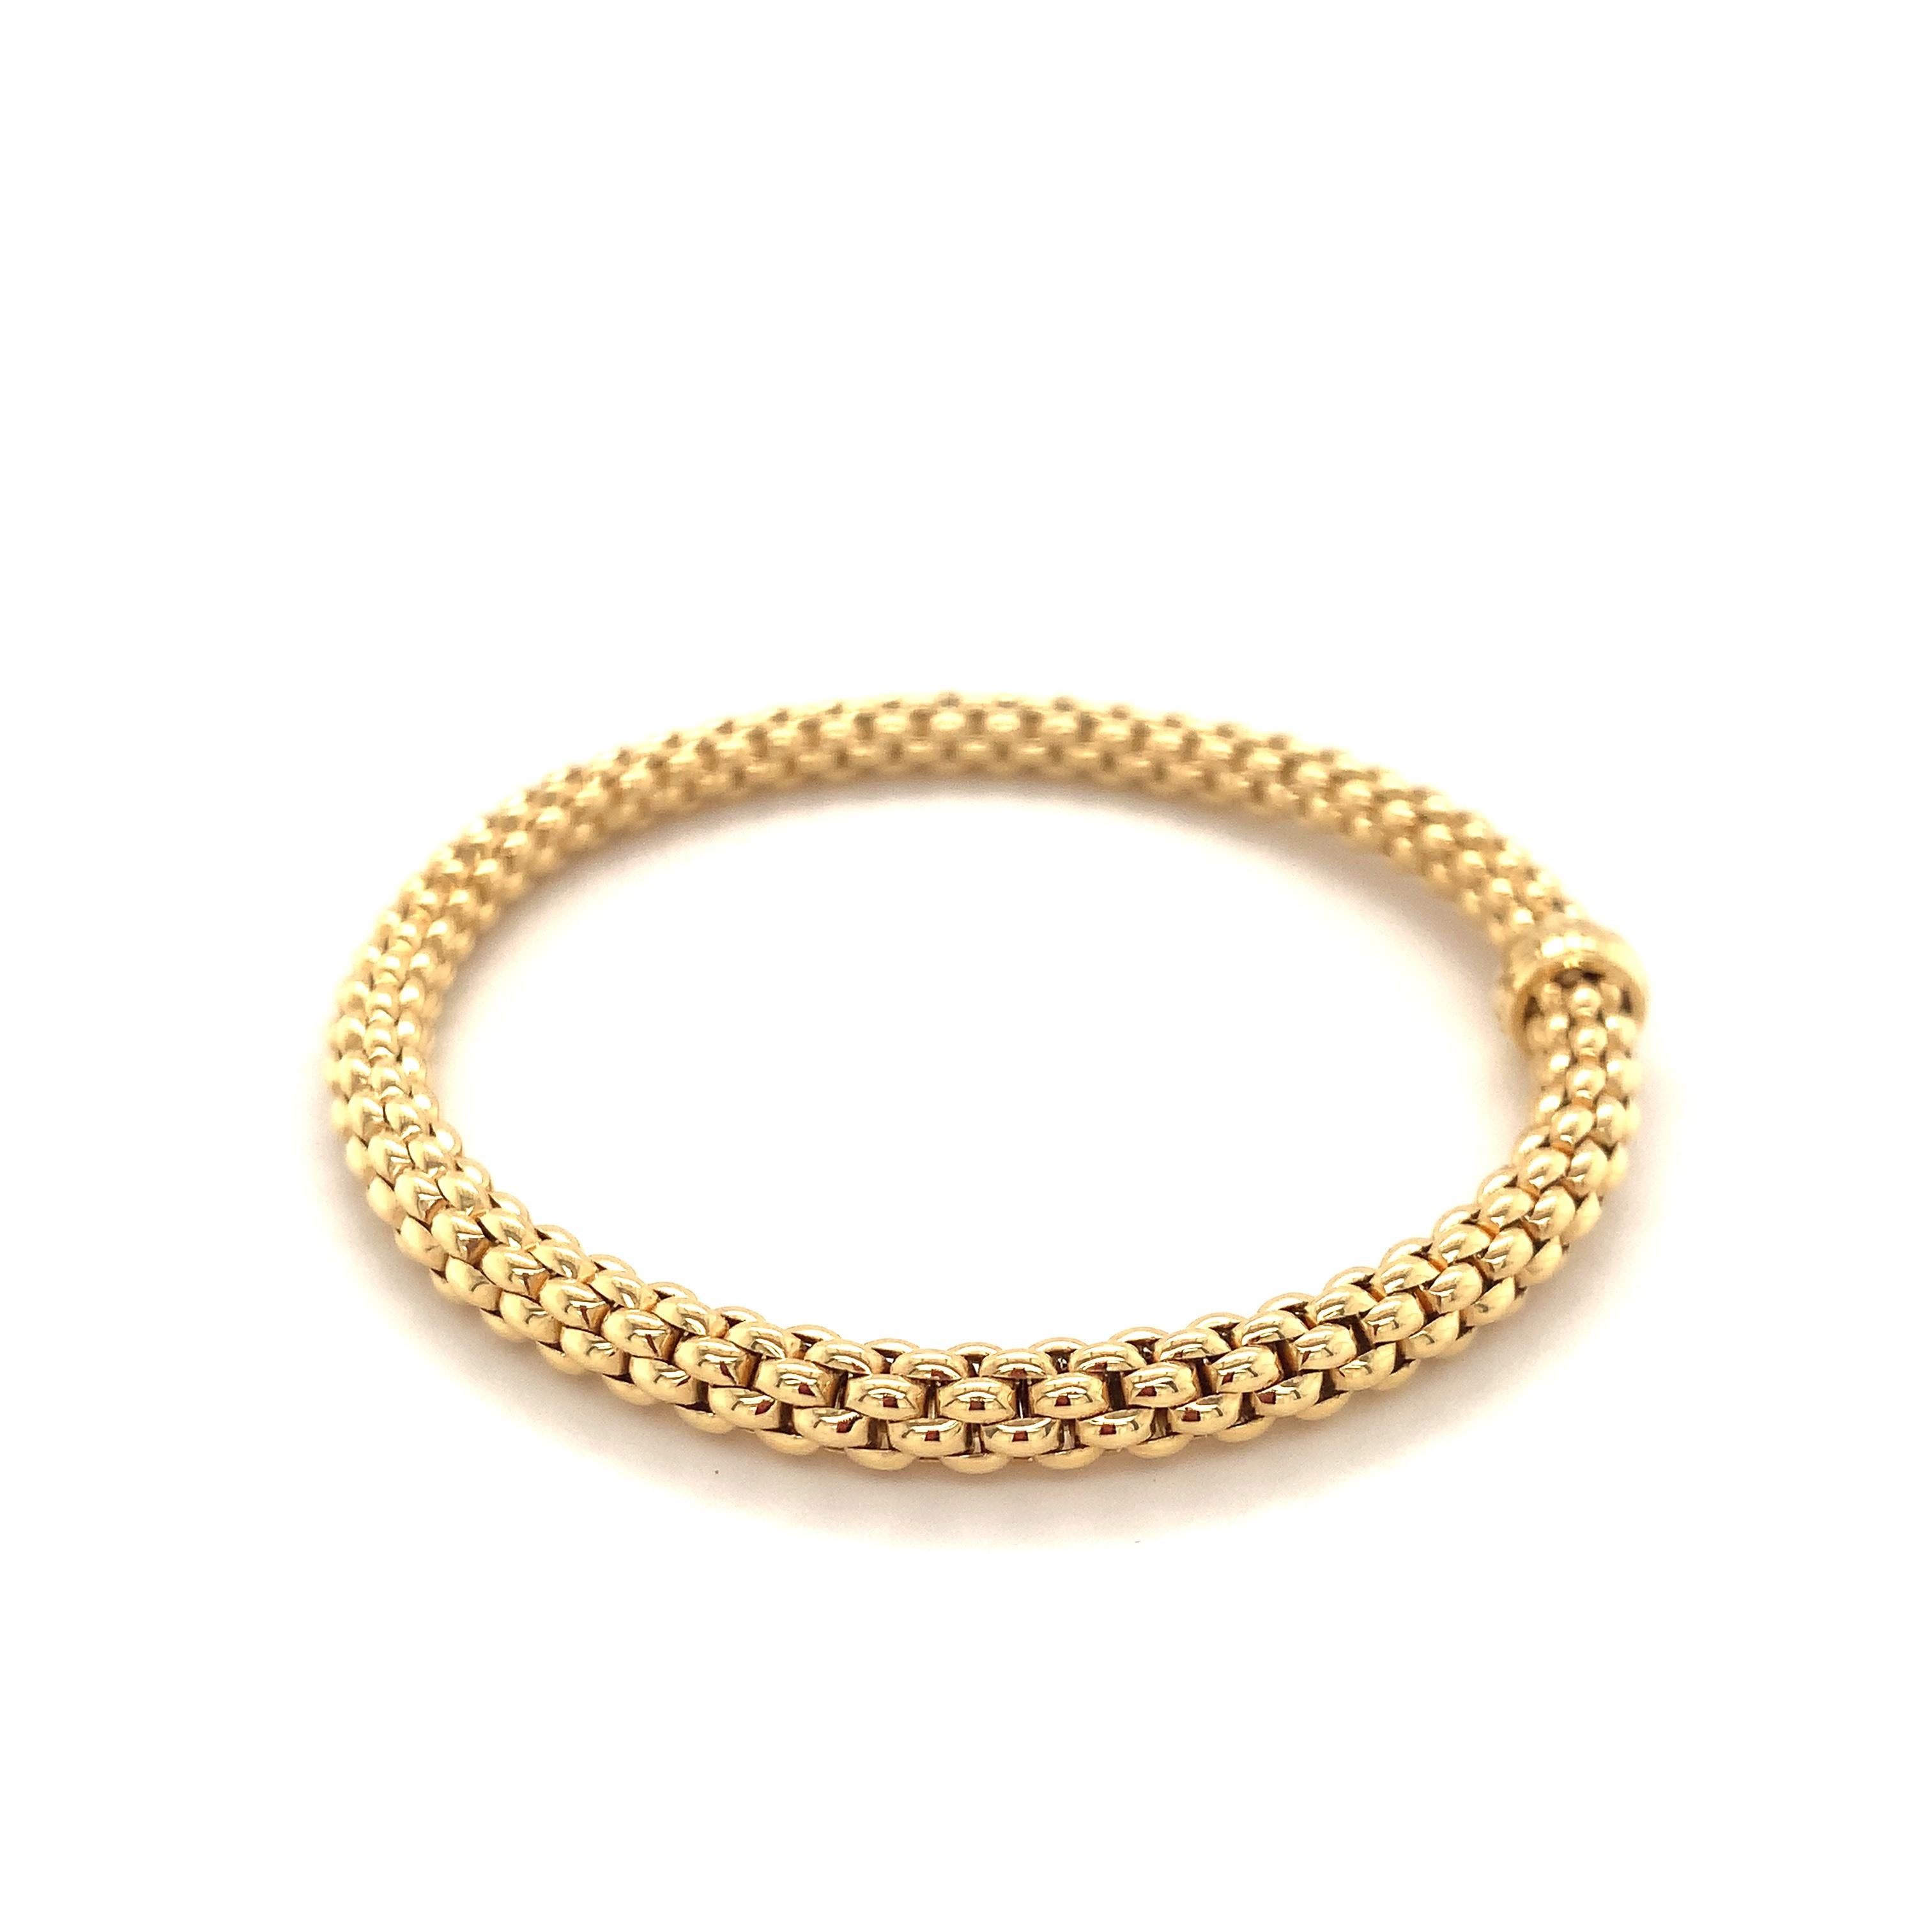 Fope Bracelet 18K Yellow Gold with Solid Gold Rondel 620BM-G 10